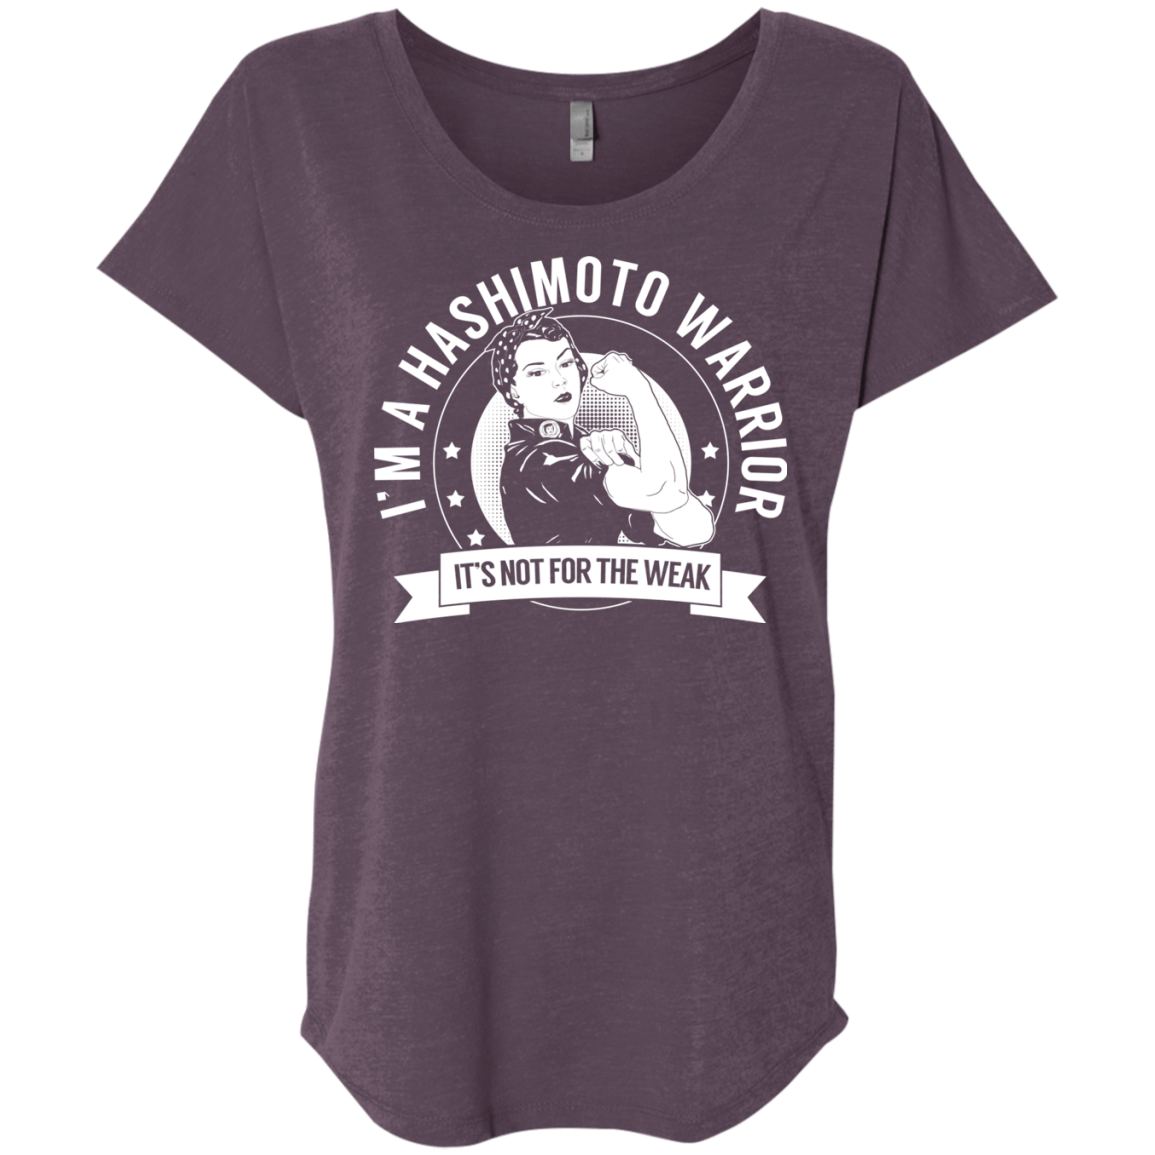 Hashimoto's Disease - Hashimoto Warrior Not For The Weak Dolman Sleeve - The Unchargeables